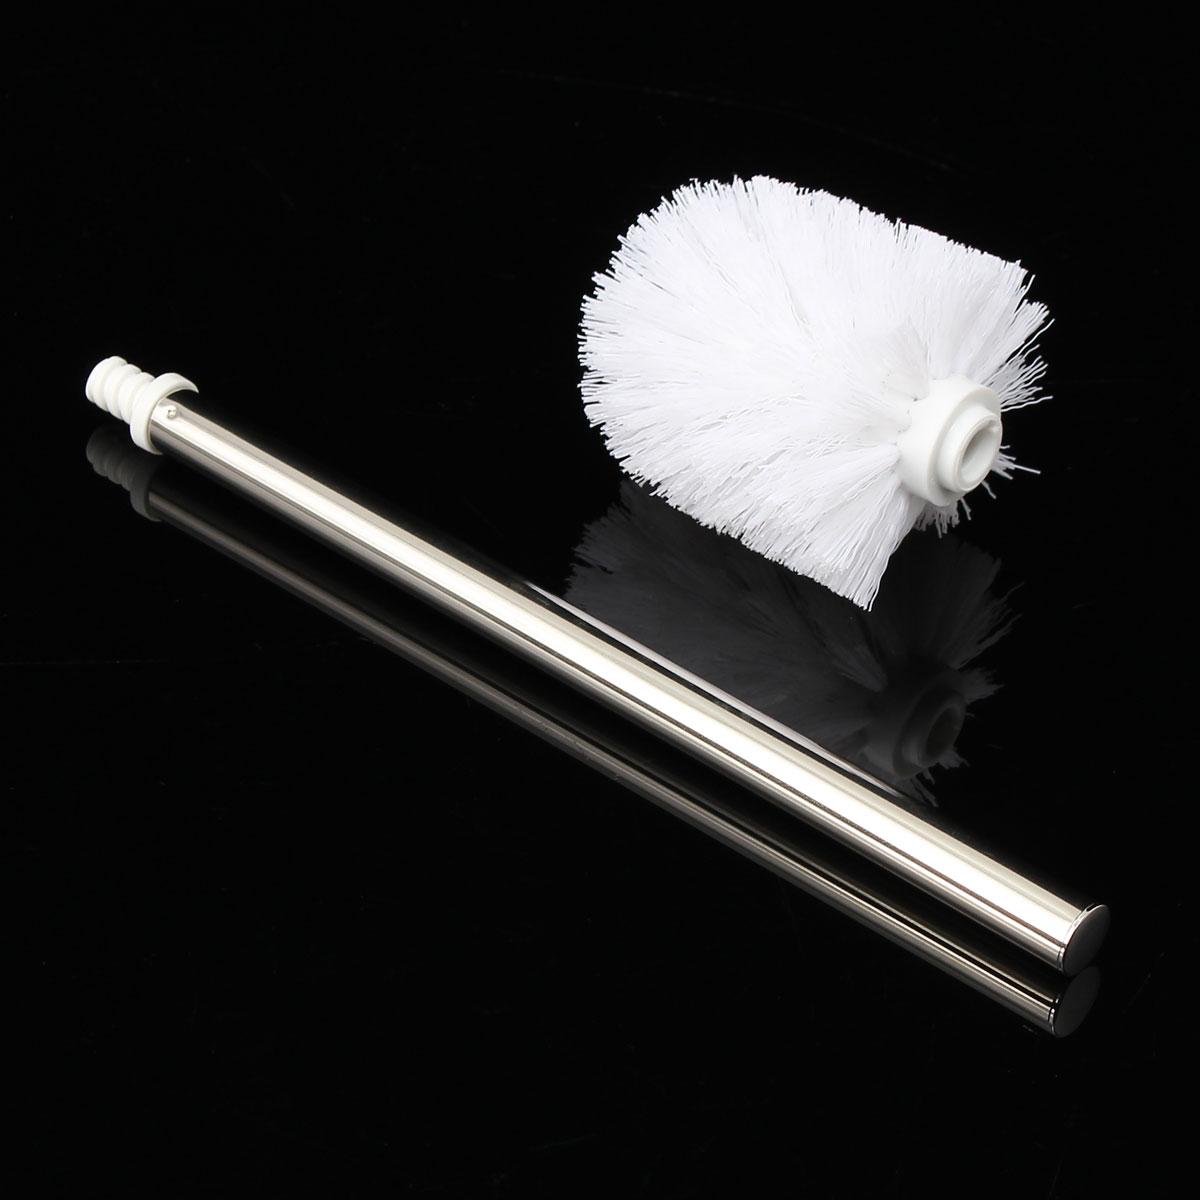 Stainless-Steel-WC-Bathroom-Cleaning-Toilet-Brush-White-Head-Holders-Cleaning-Brushes-1137680-6